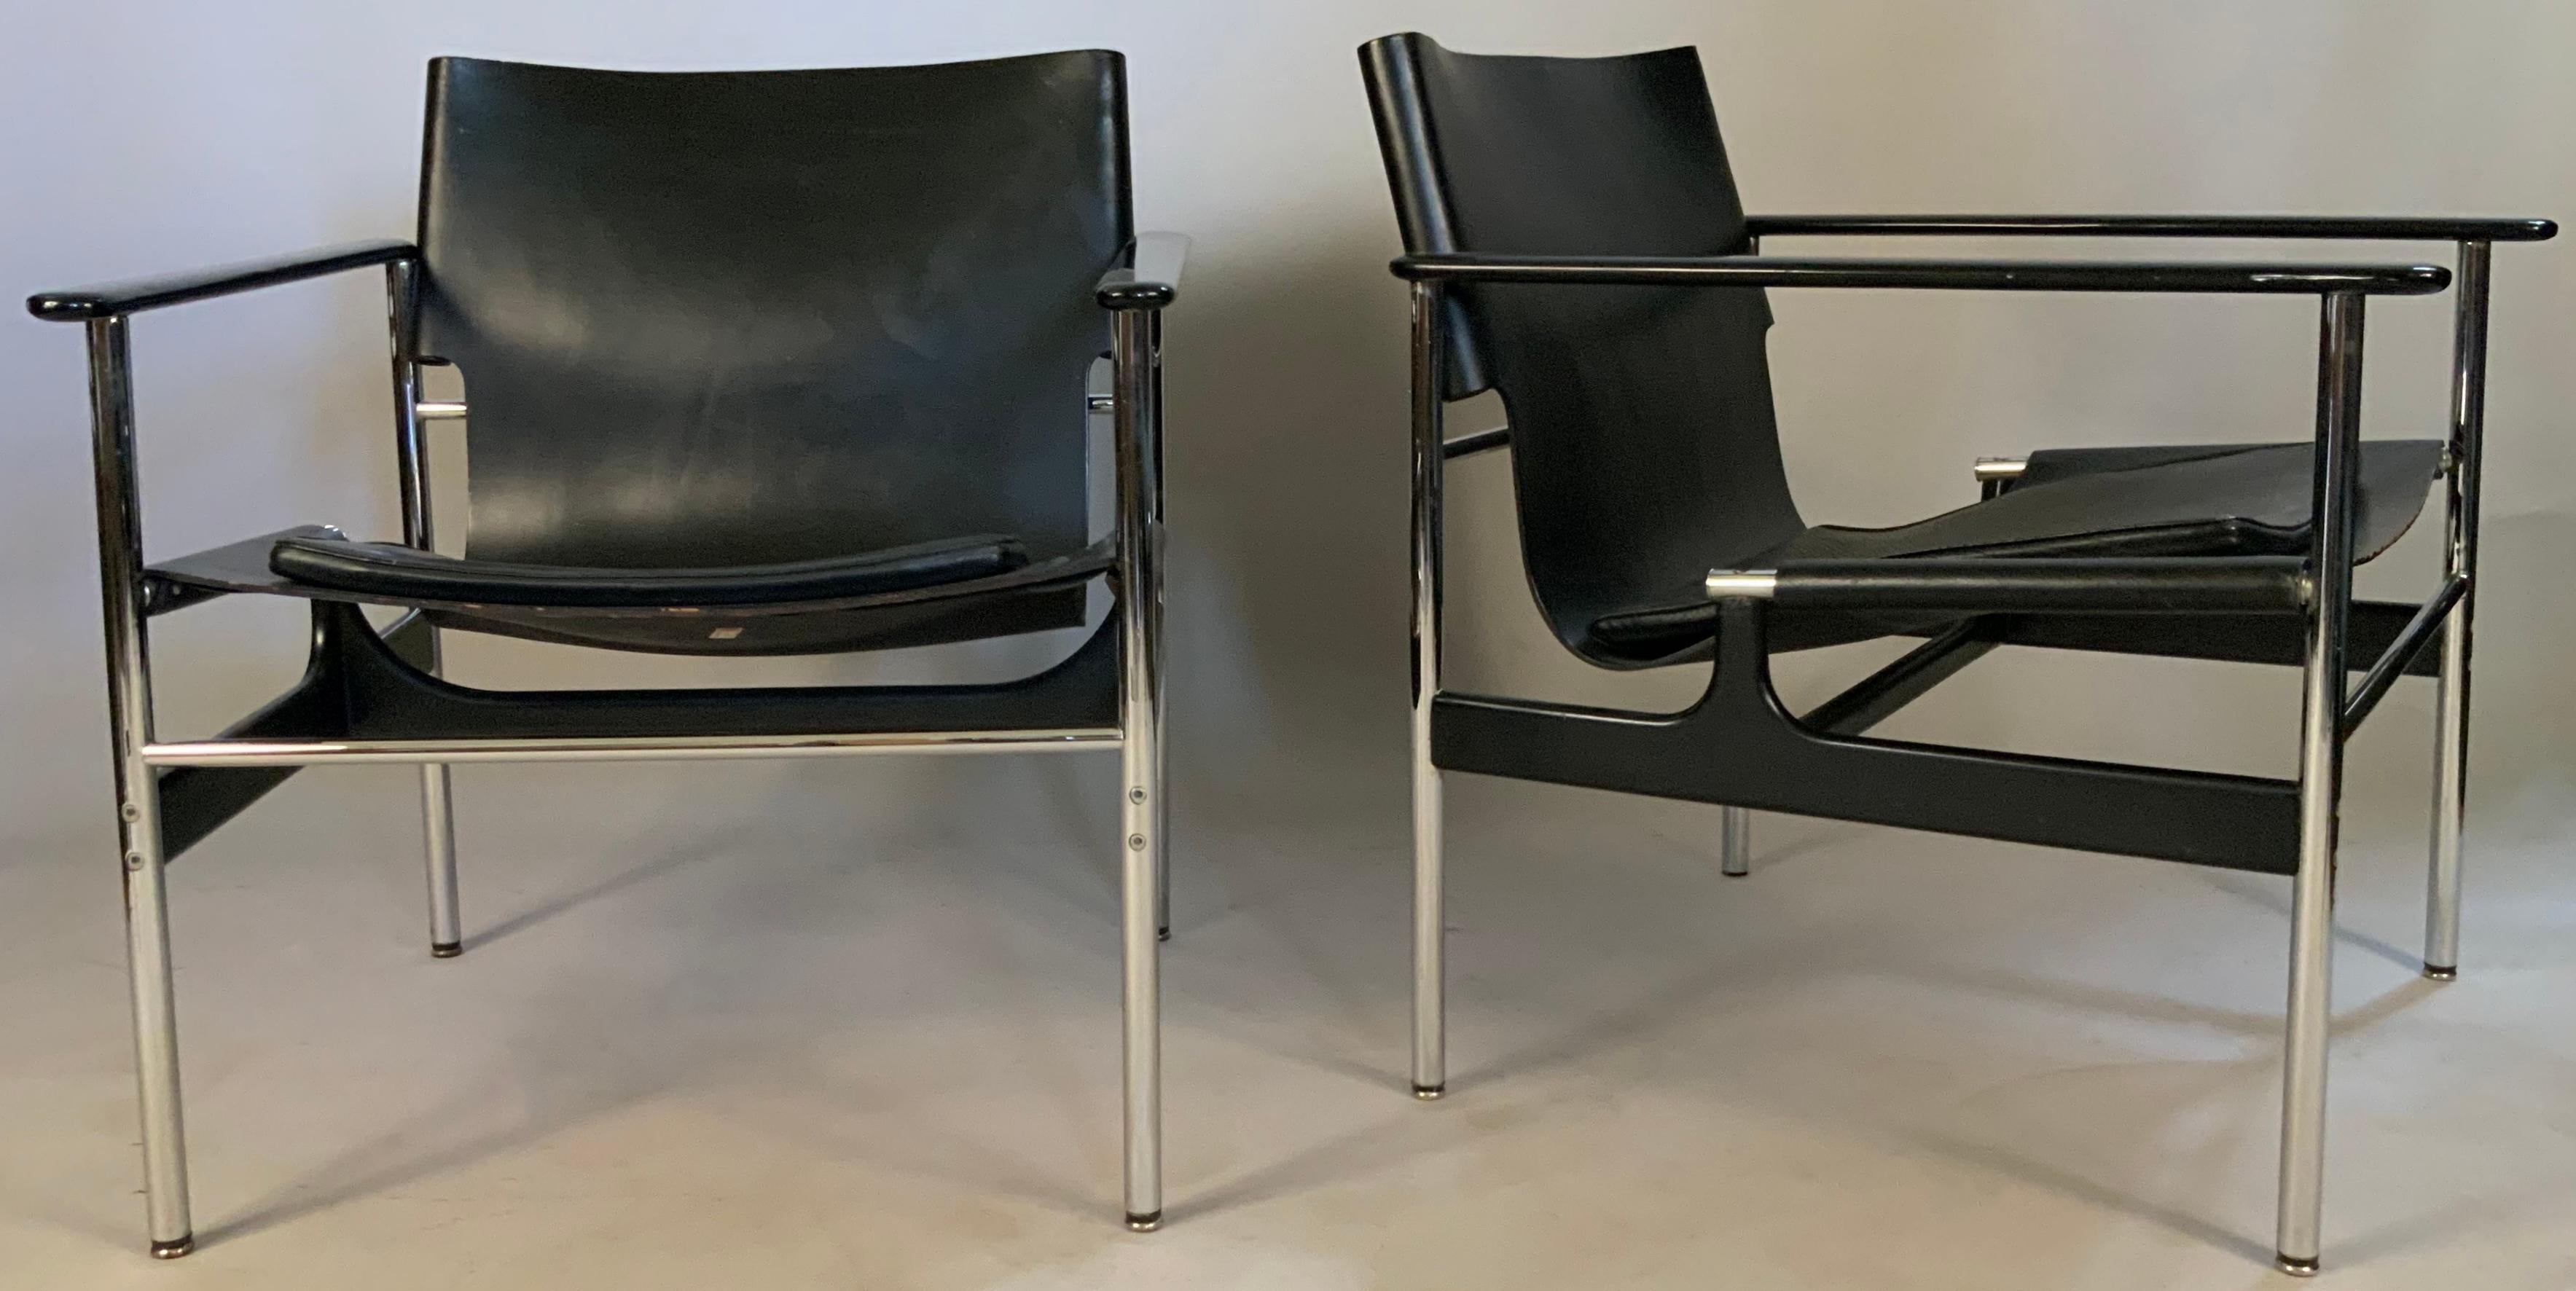 An exceptional vintage 1960's pair of leather lounge chairs designed by Charles Pollock for Knoll Associates. These early Knoll chairs are in excellent condition, with original saddle leather seats, and glove leather cushions. The frames are made